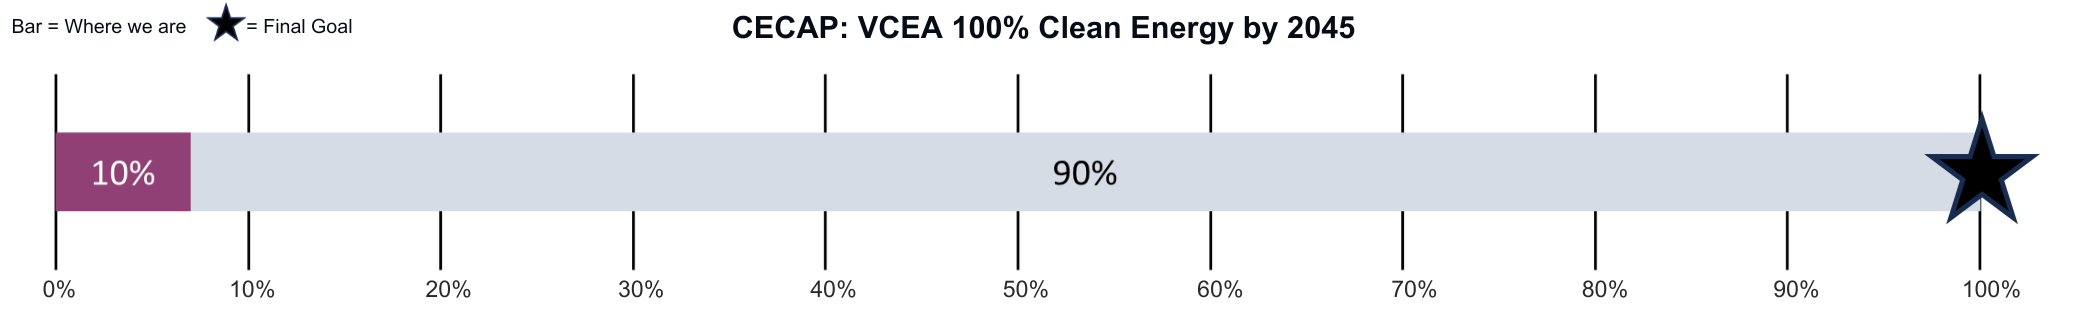 CECAP_ Virginia Clean Economy Act goal of 100% clean energy by 2045 goal bar showing progress of 10%